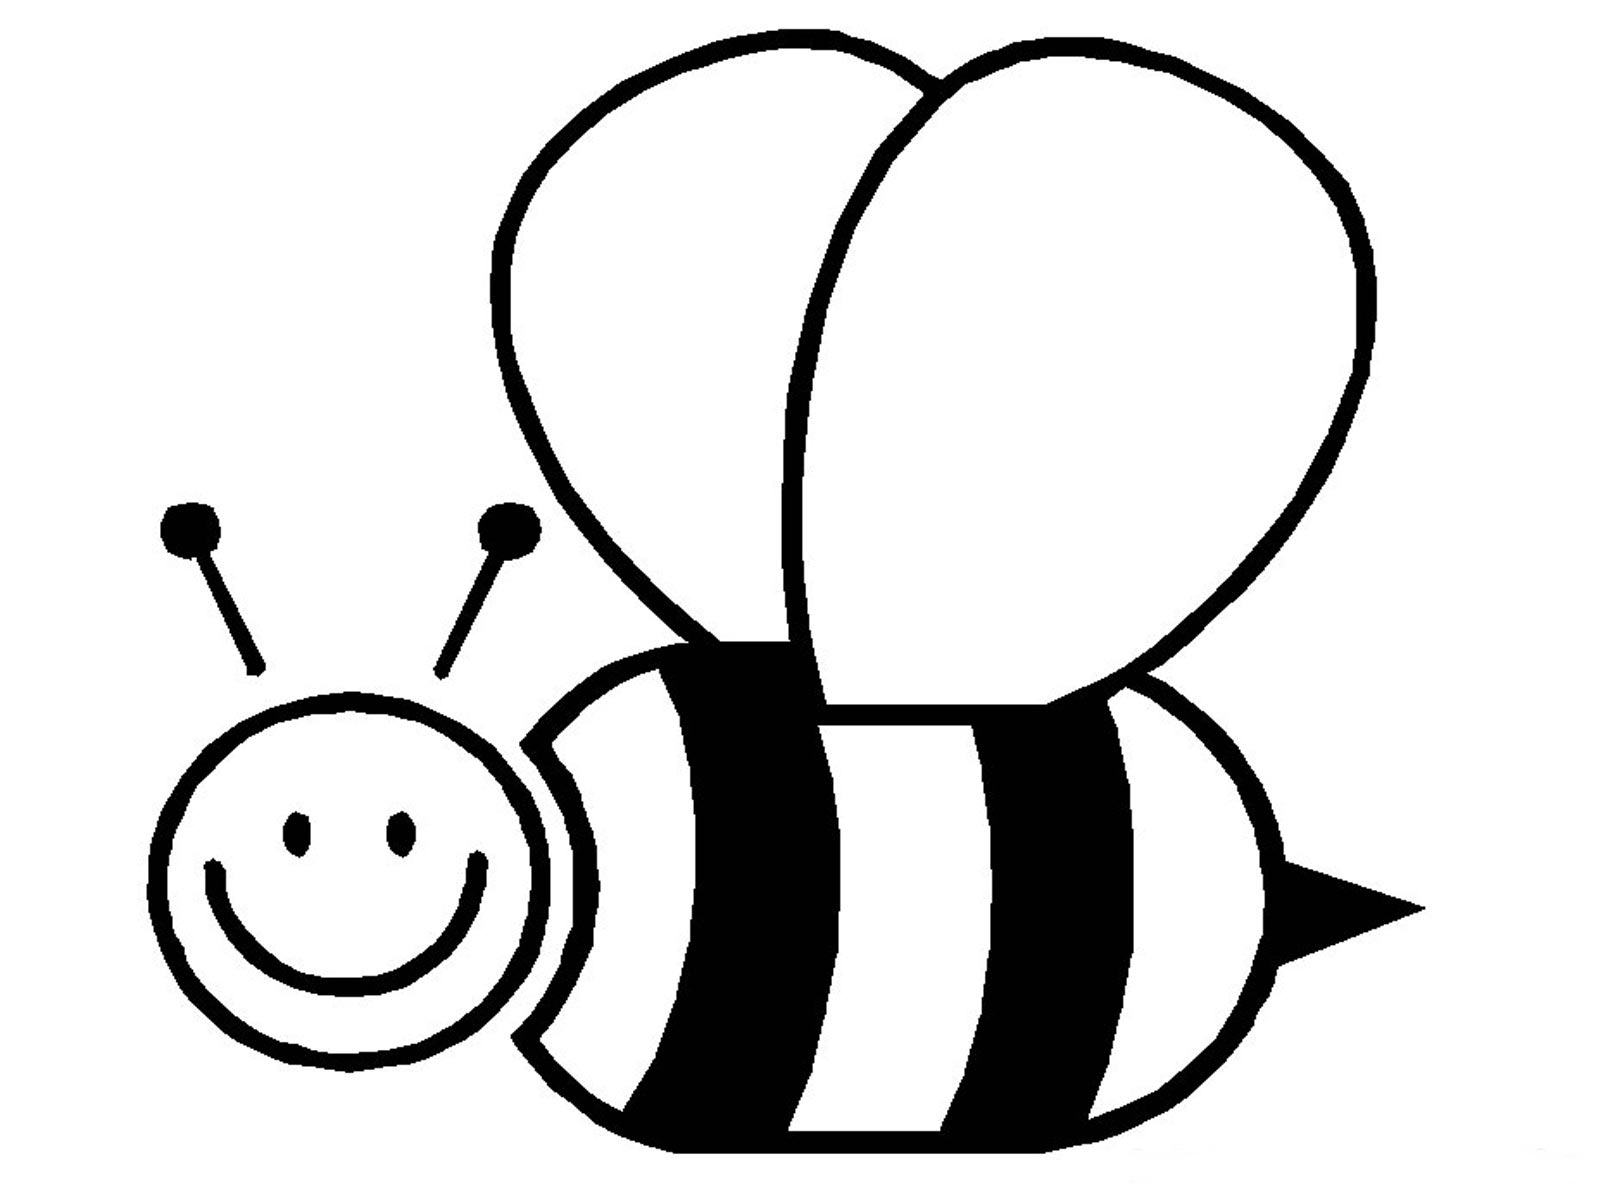 Honey bee queen ciclo clipart black and white